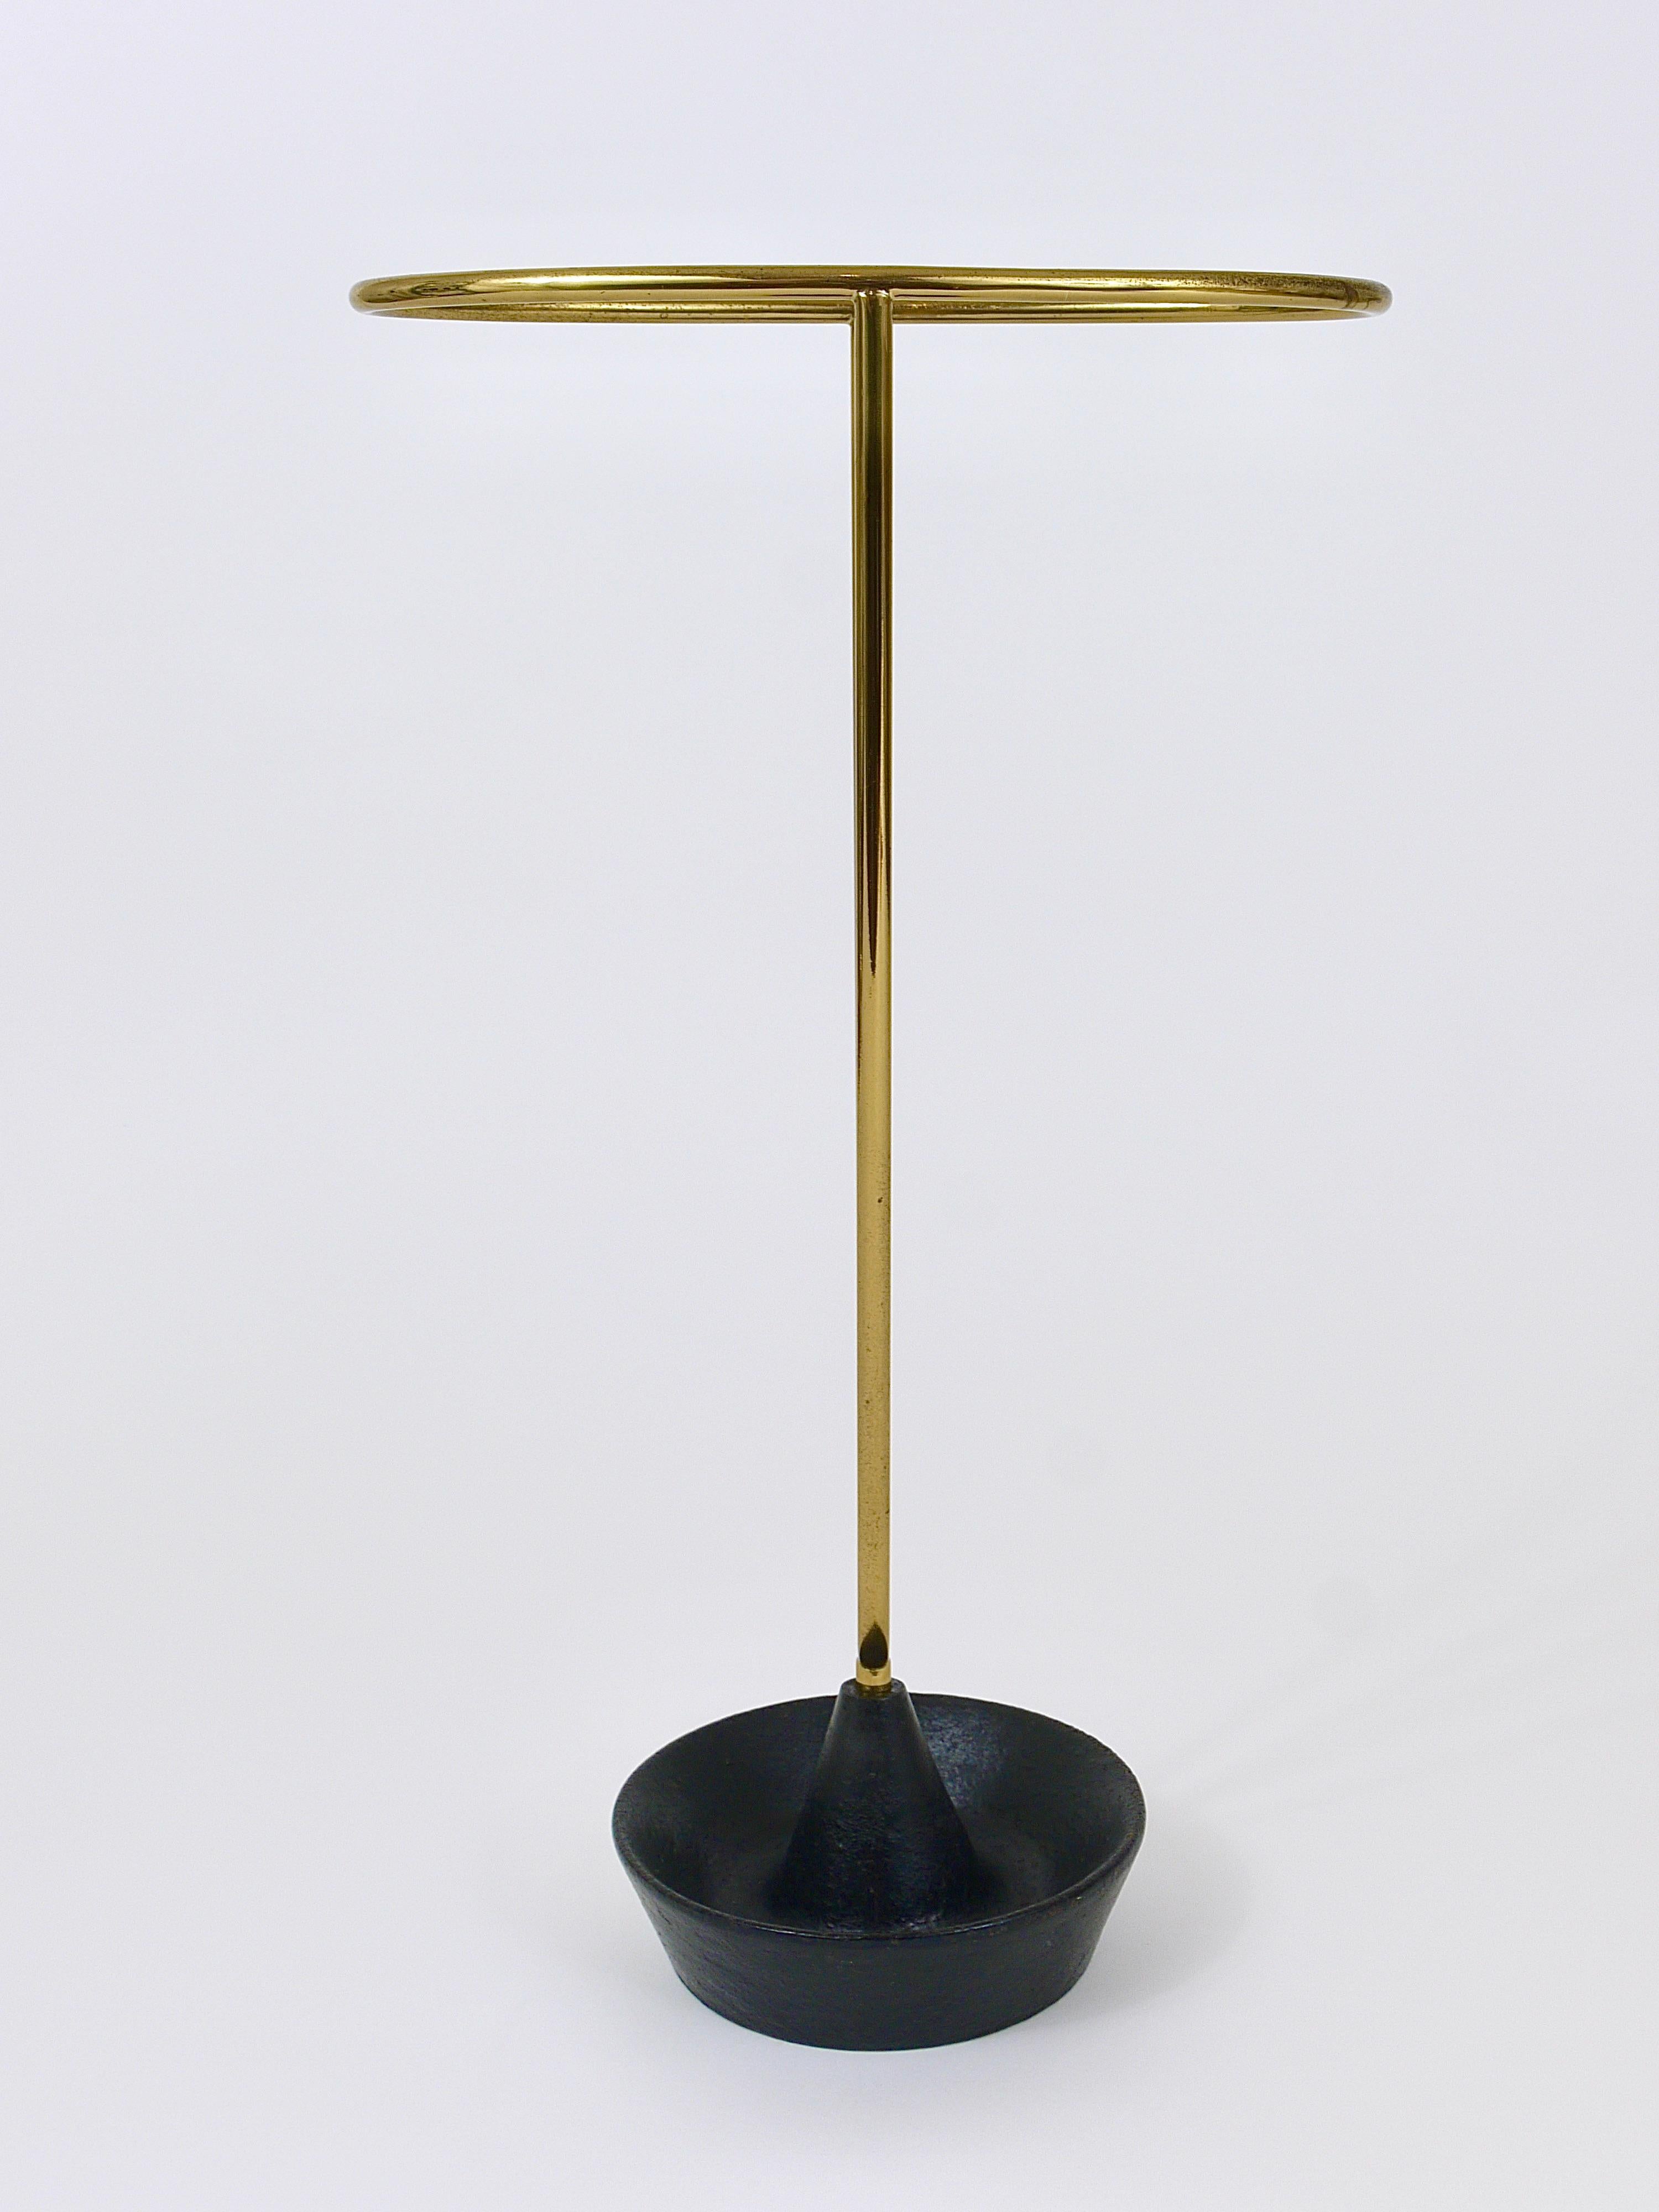 Carl Auböck Mid-Century Brass and Cast Iron Umbrella Stand, Austria, 1950s For Sale 5